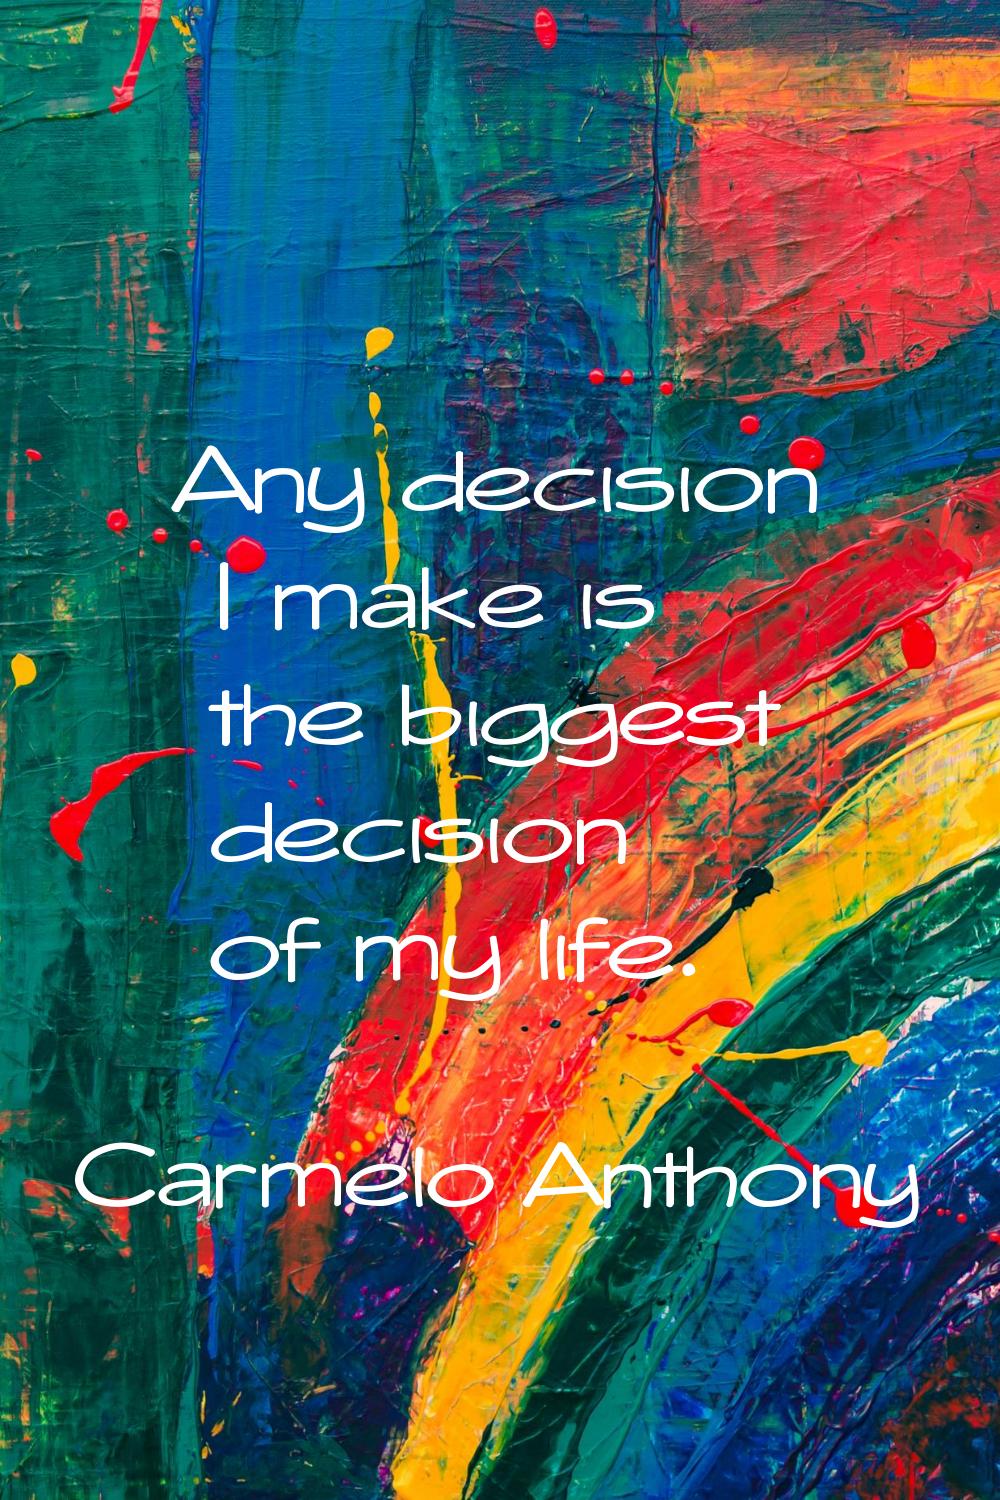 Any decision I make is the biggest decision of my life.